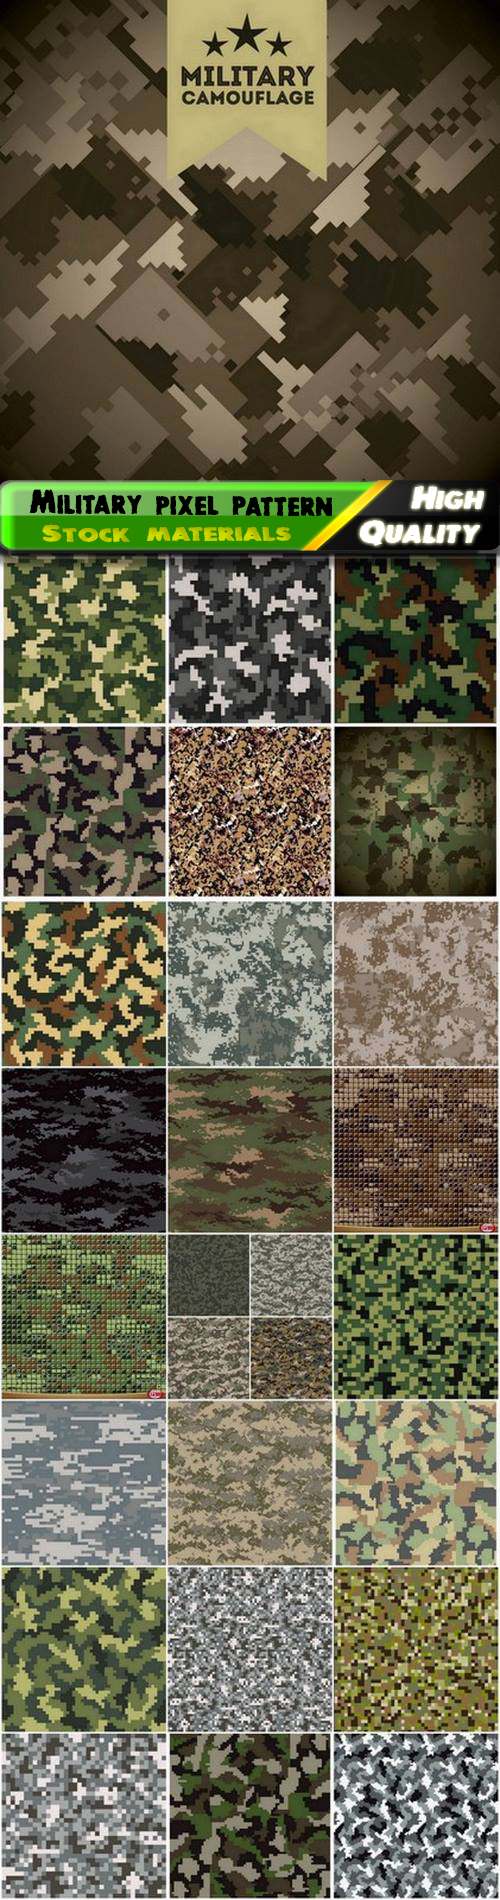 Abstract military pixel seamless pattern colors of camouflage - 25 Eps